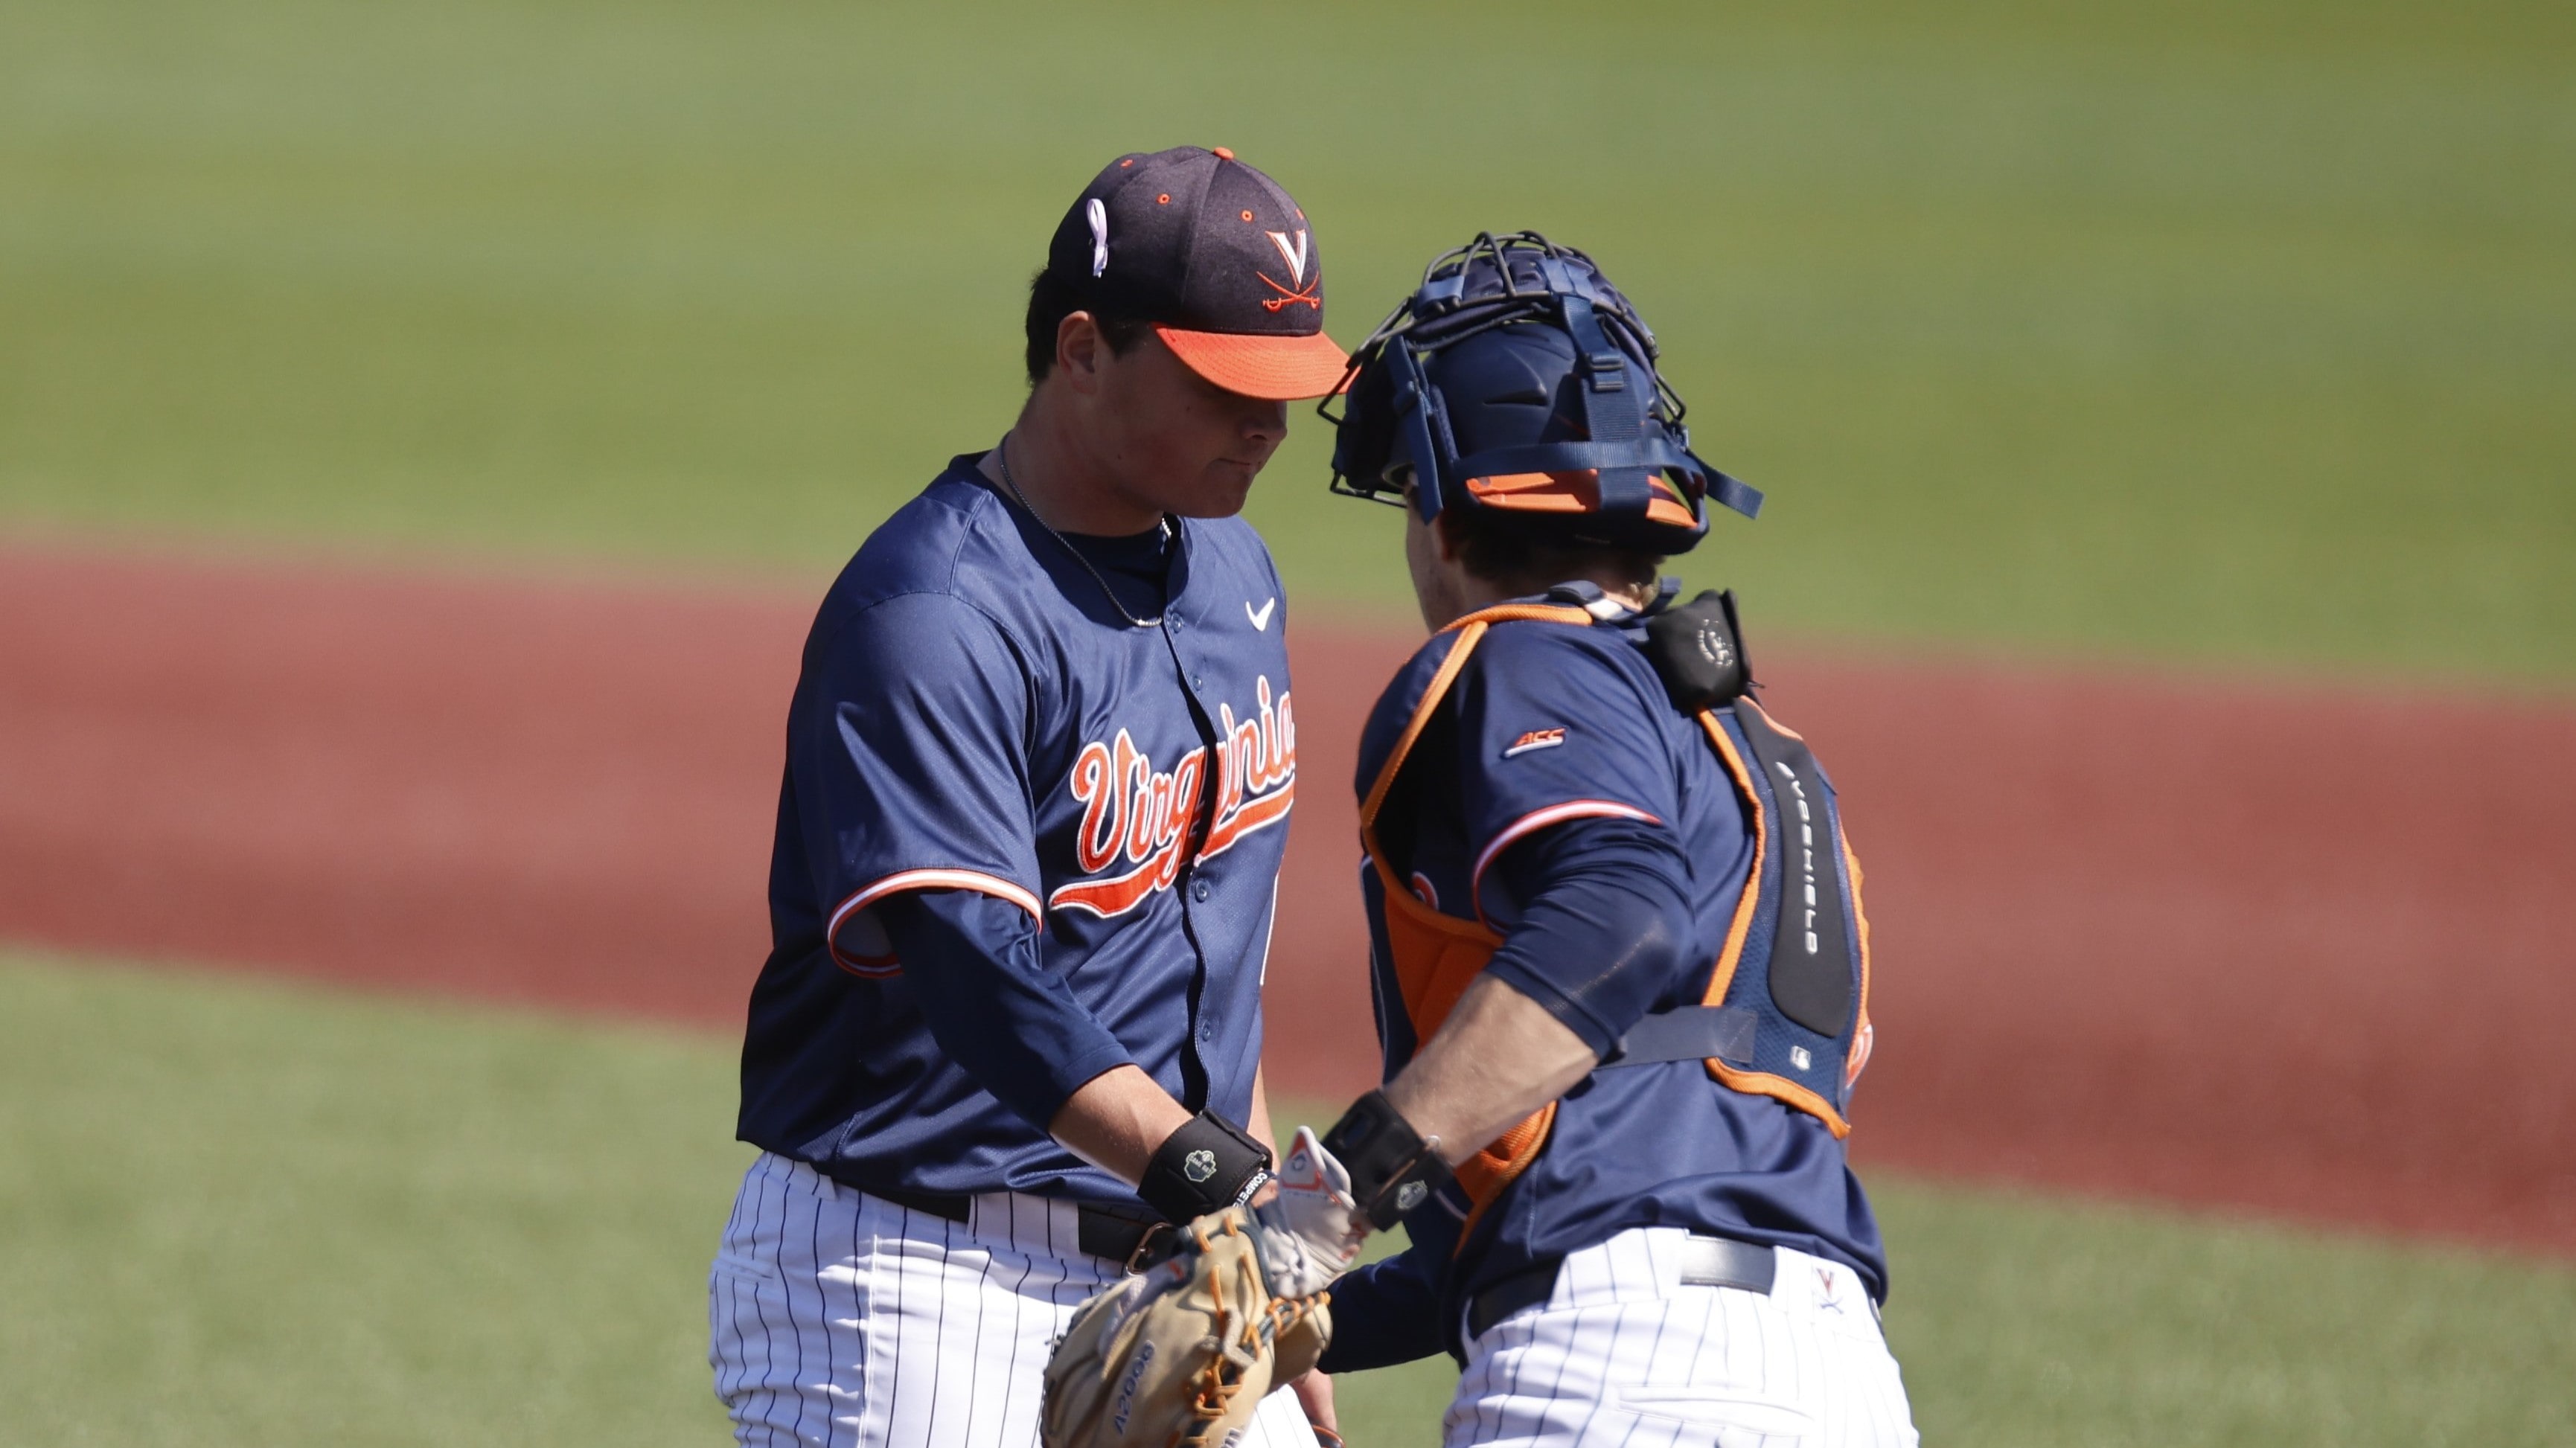 Virginia Baseball Evens Series With Gritty Comeback Win Over Boston College